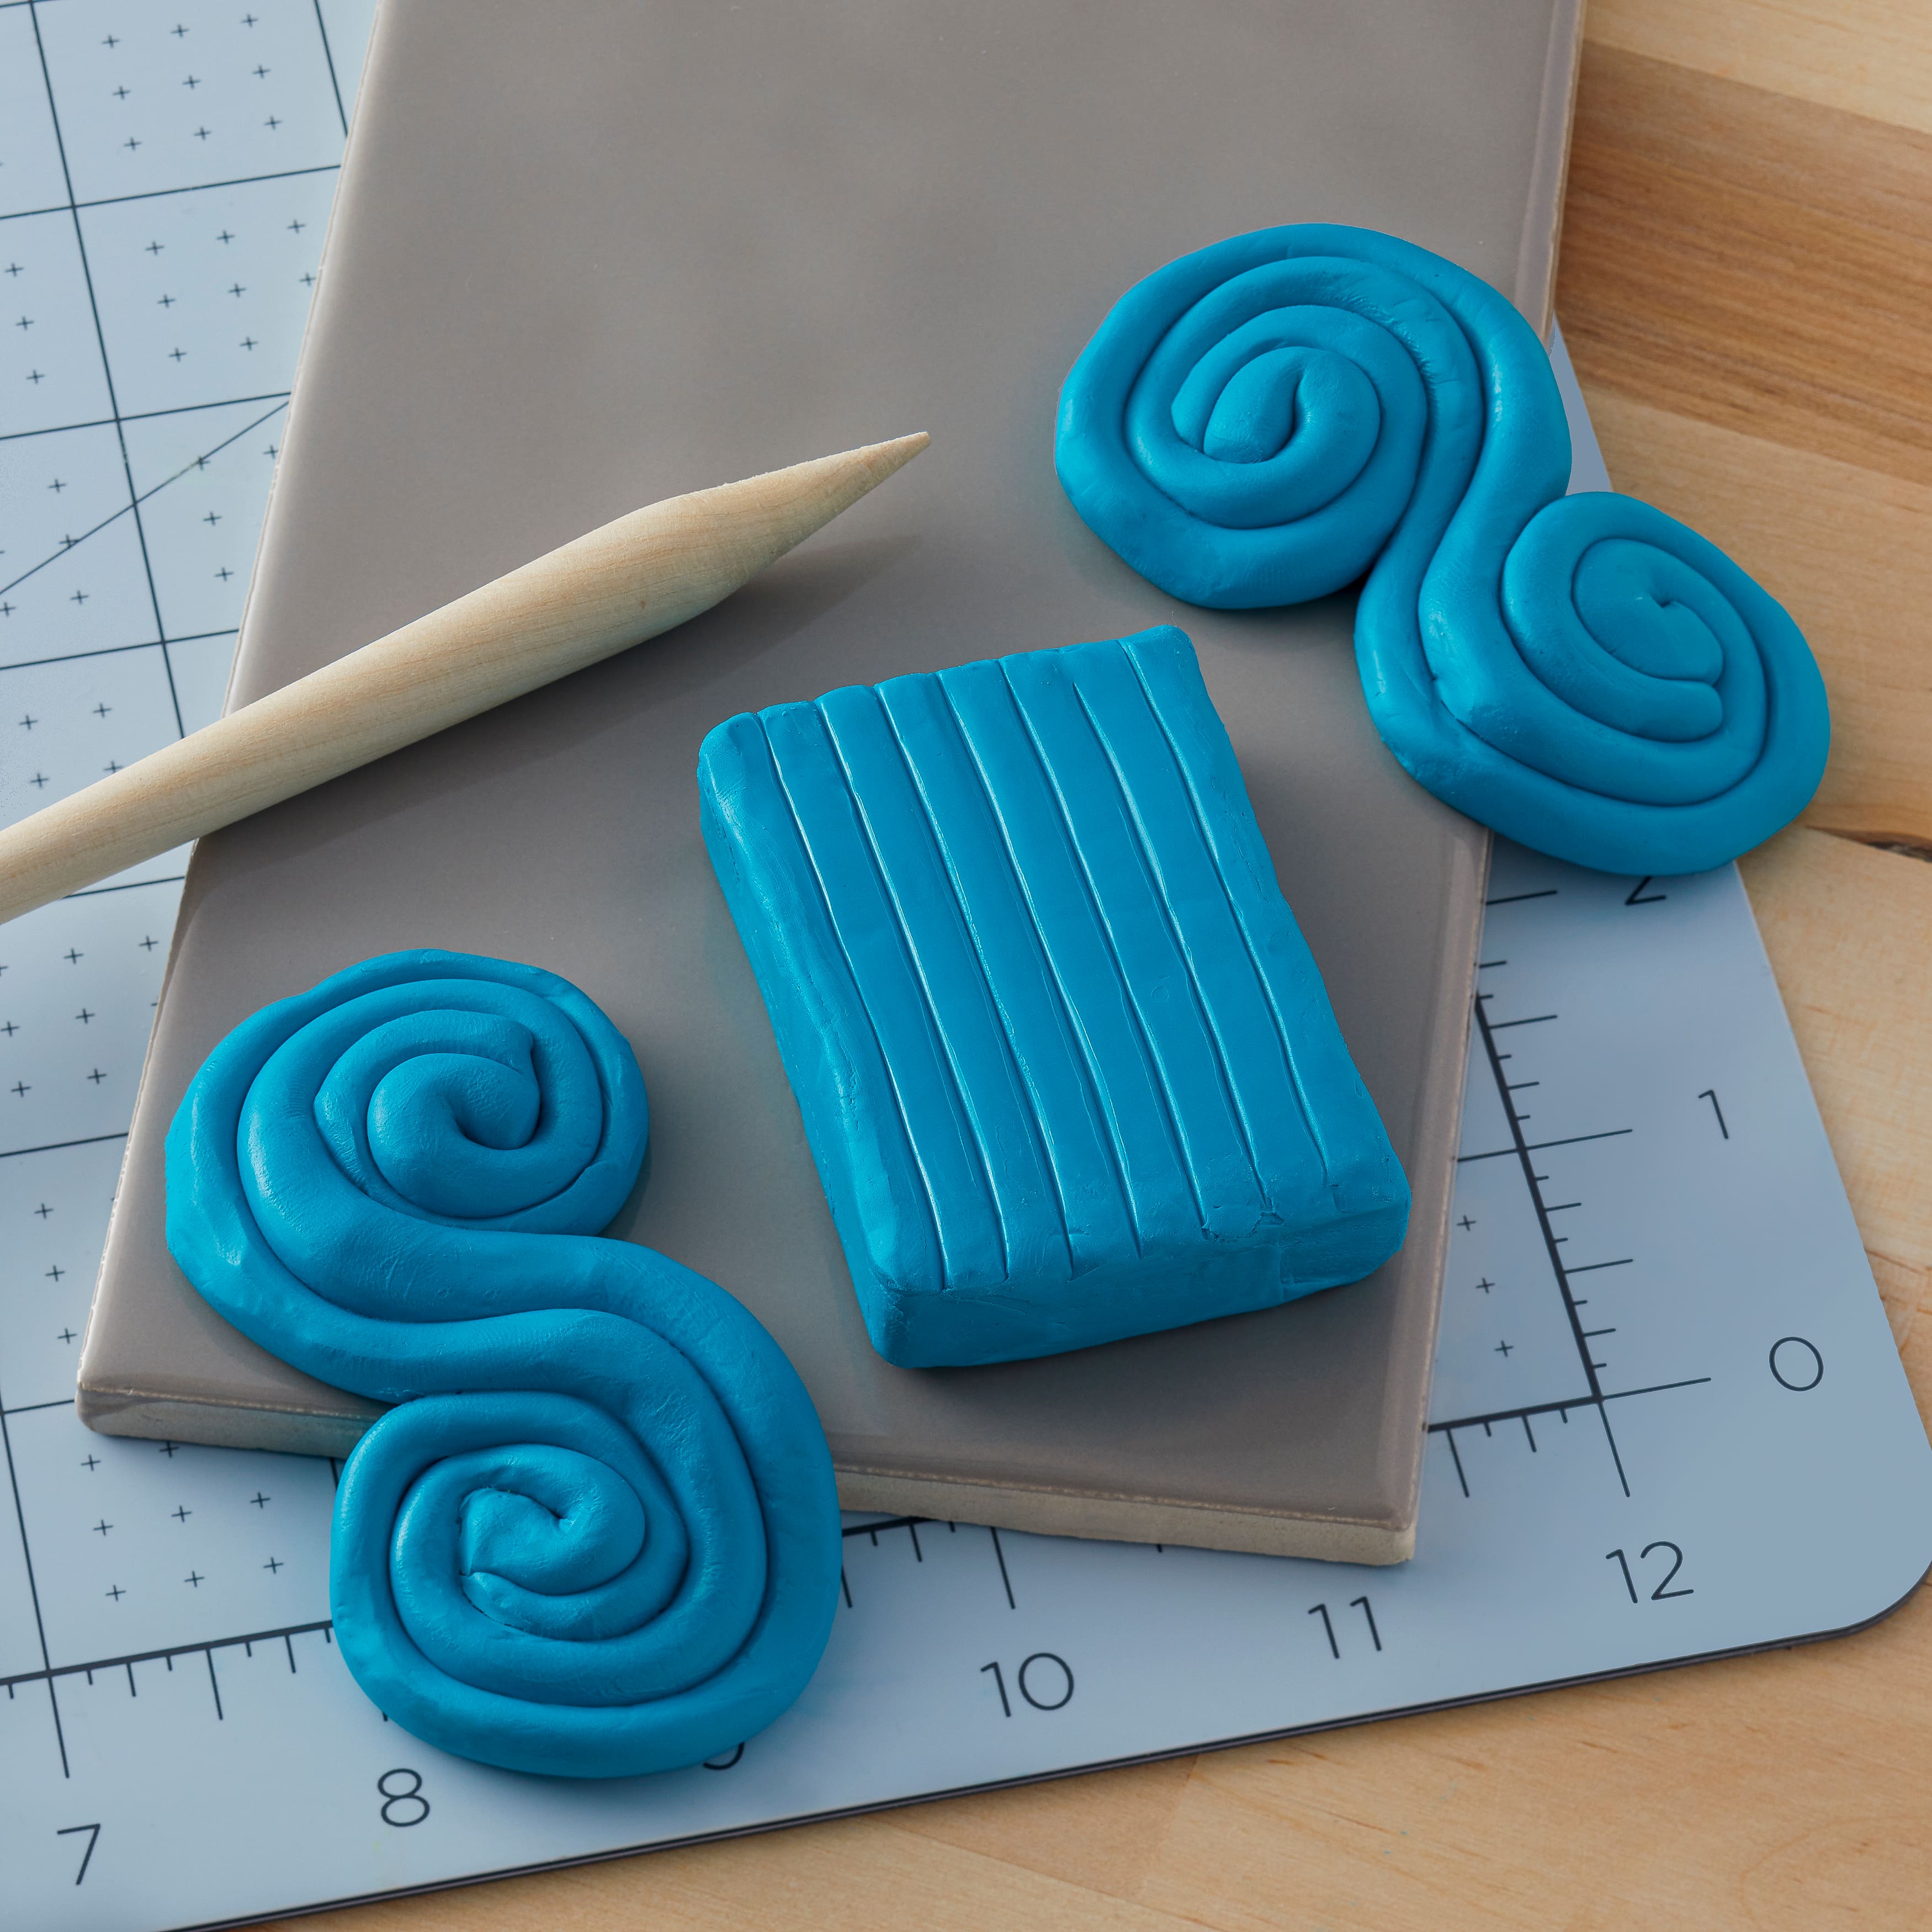 Craftsmart Polymer Clay from Michaels - The Blue Bottle Tree